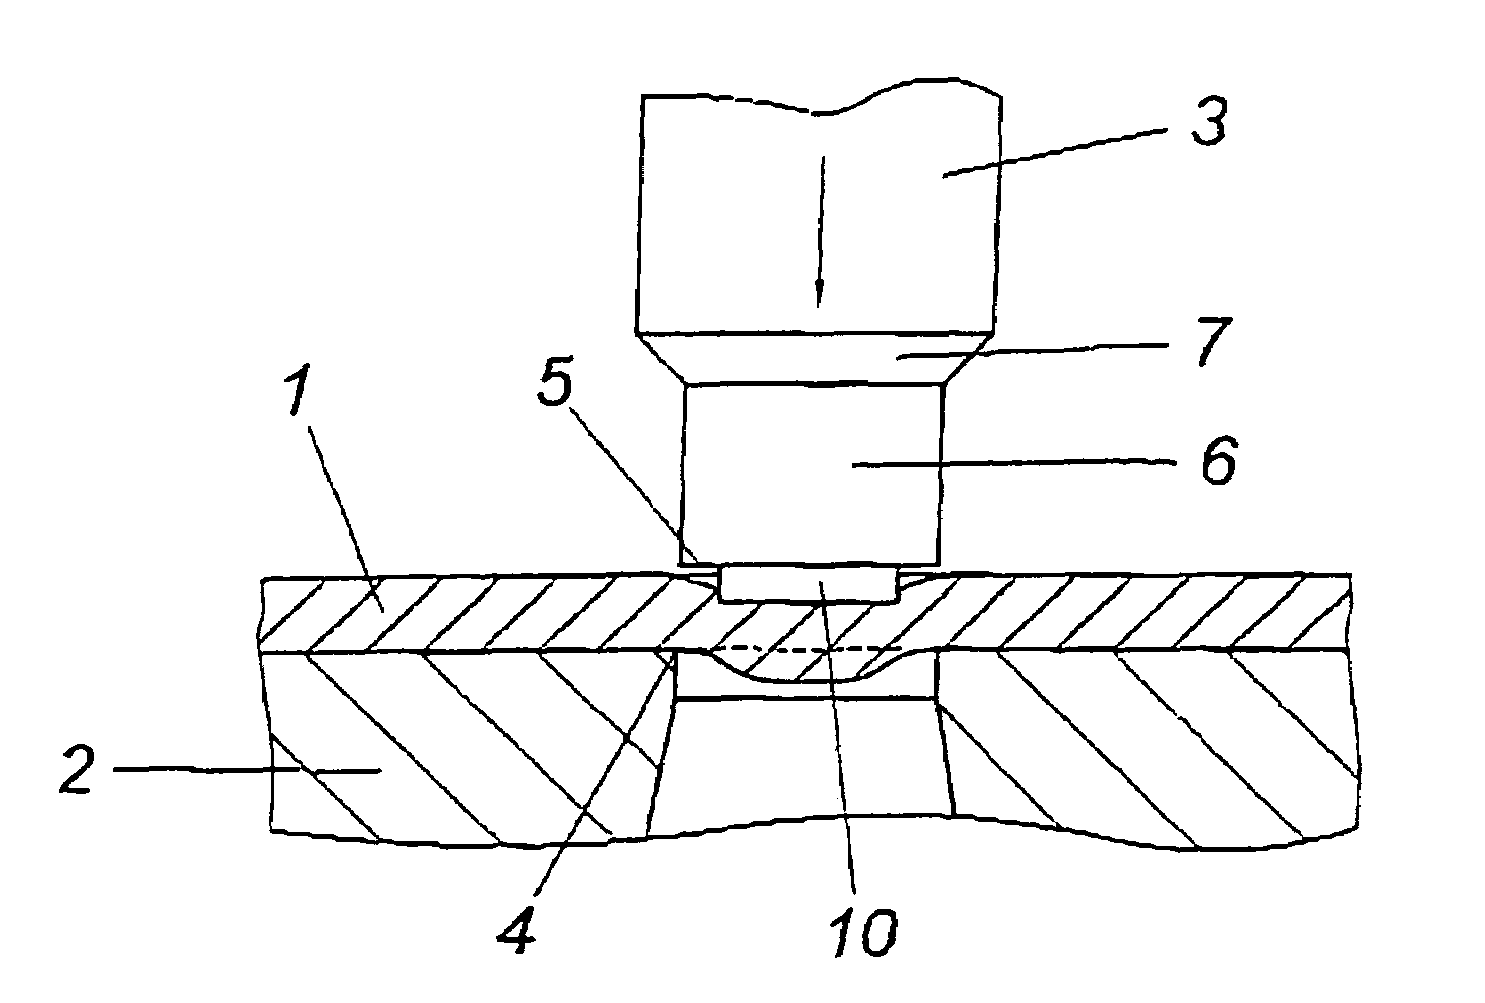 Method for perforating a sheet